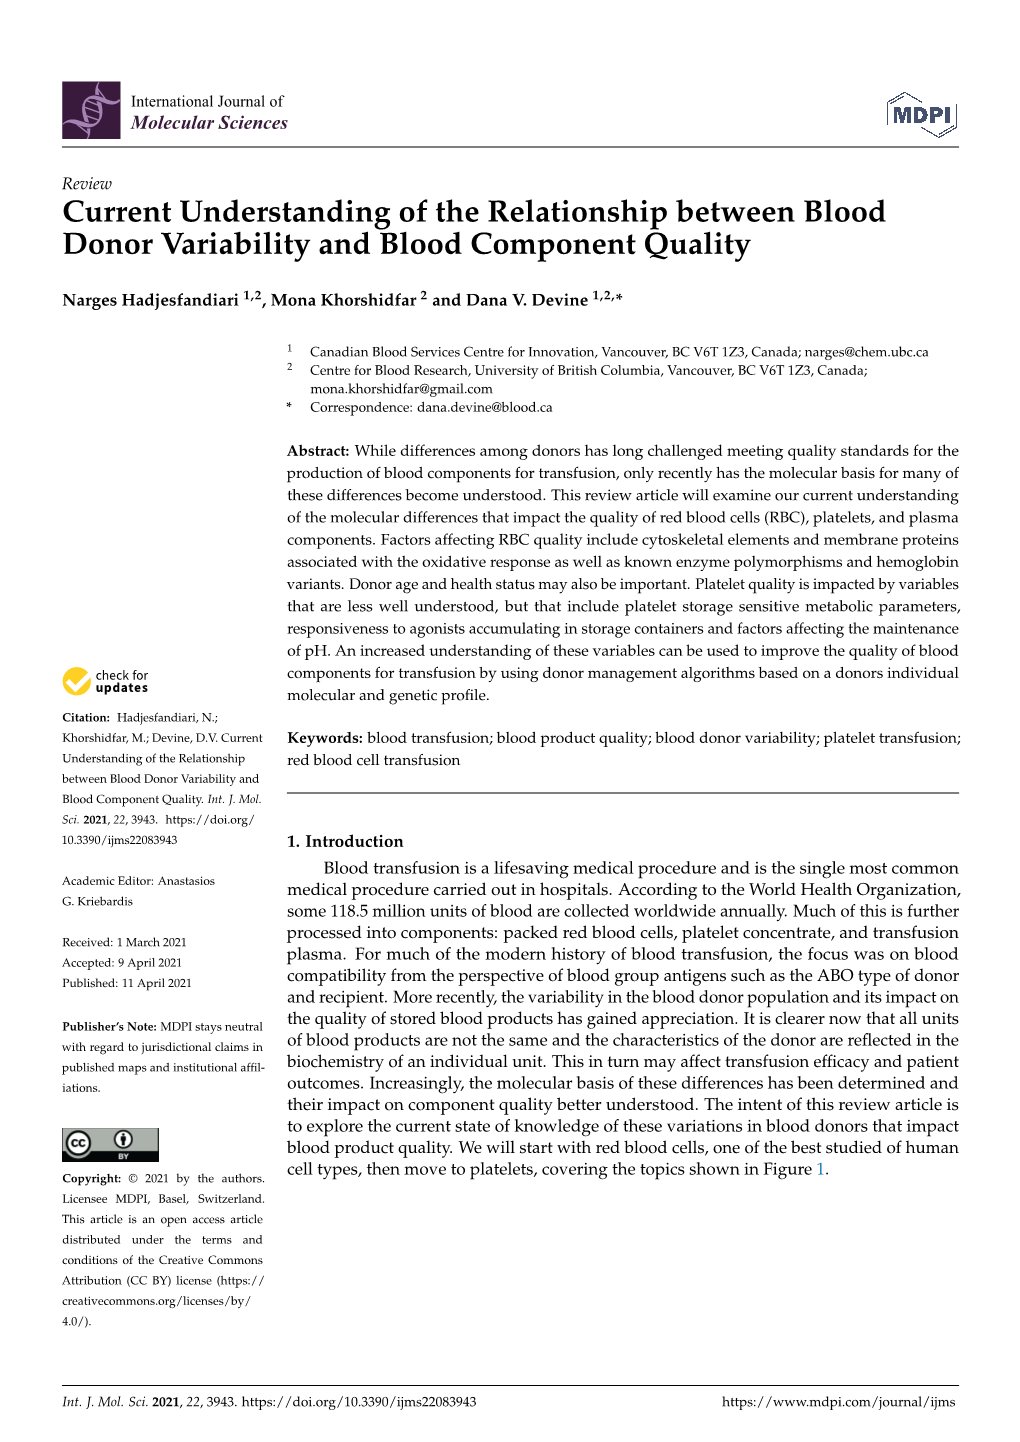 Current Understanding of the Relationship Between Blood Donor Variability and Blood Component Quality